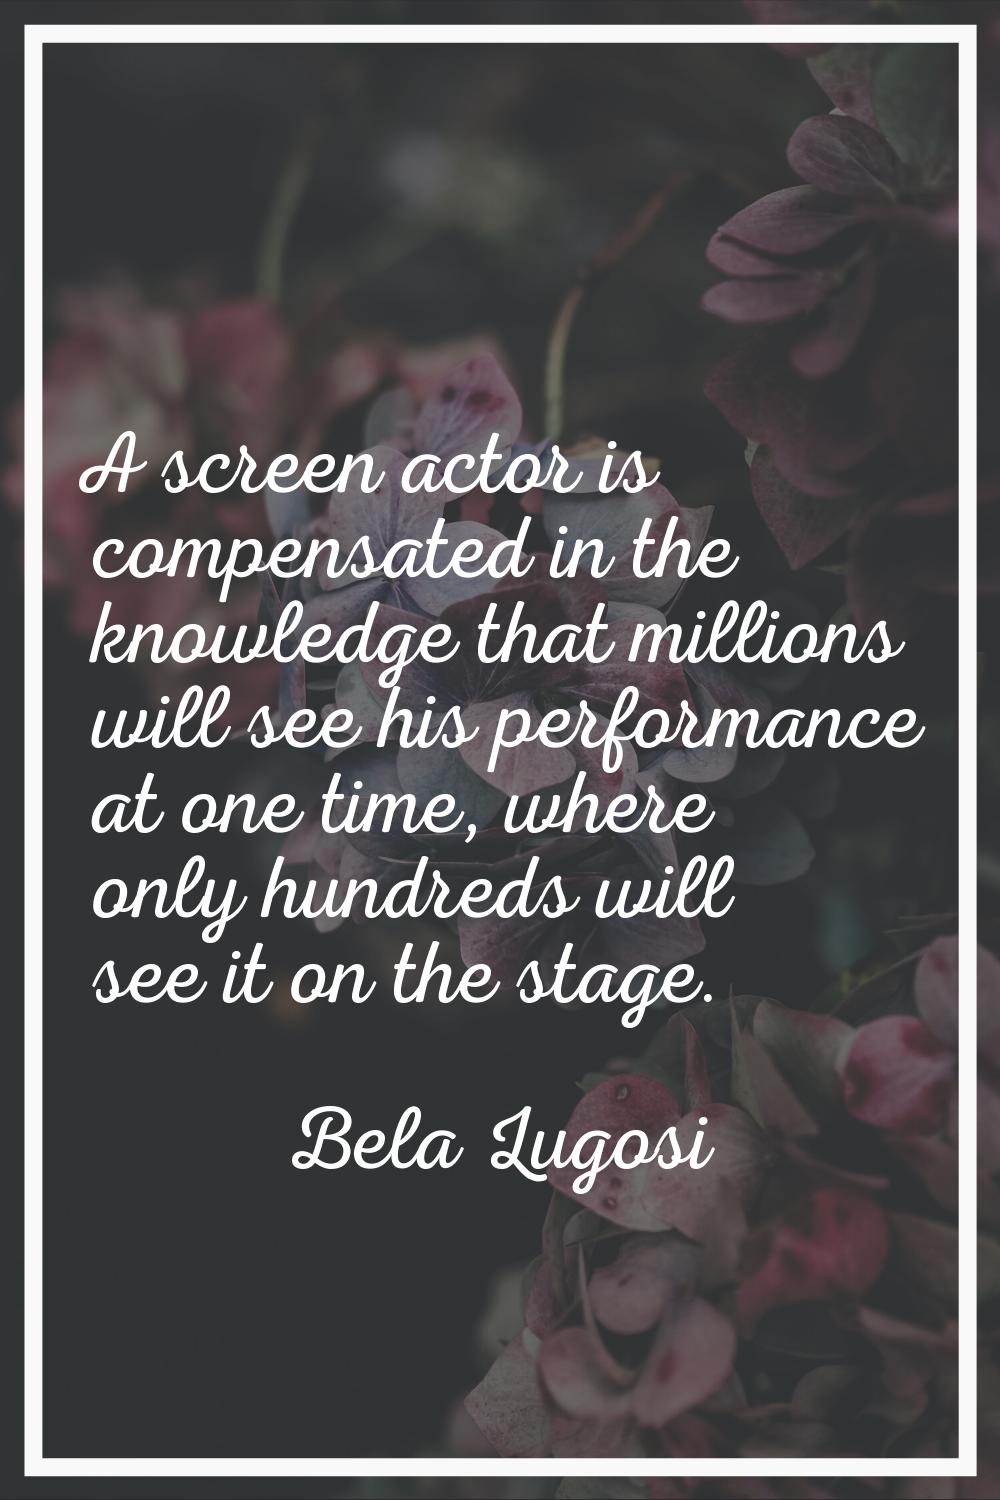 A screen actor is compensated in the knowledge that millions will see his performance at one time, 